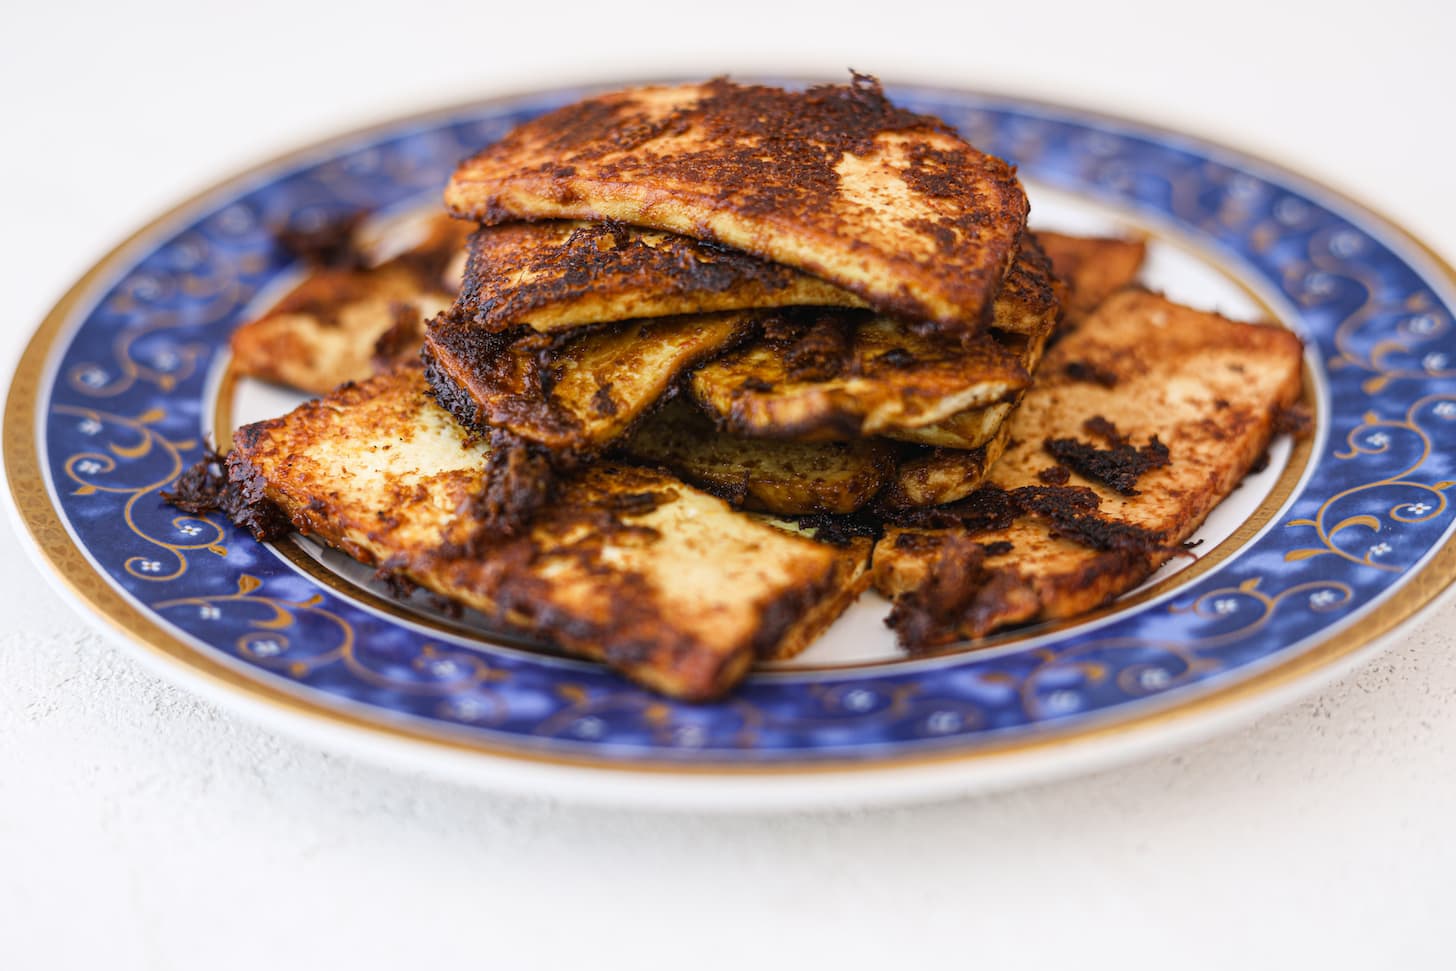 A plate with a pile of cooked slabs of tofu with a charred exterior.